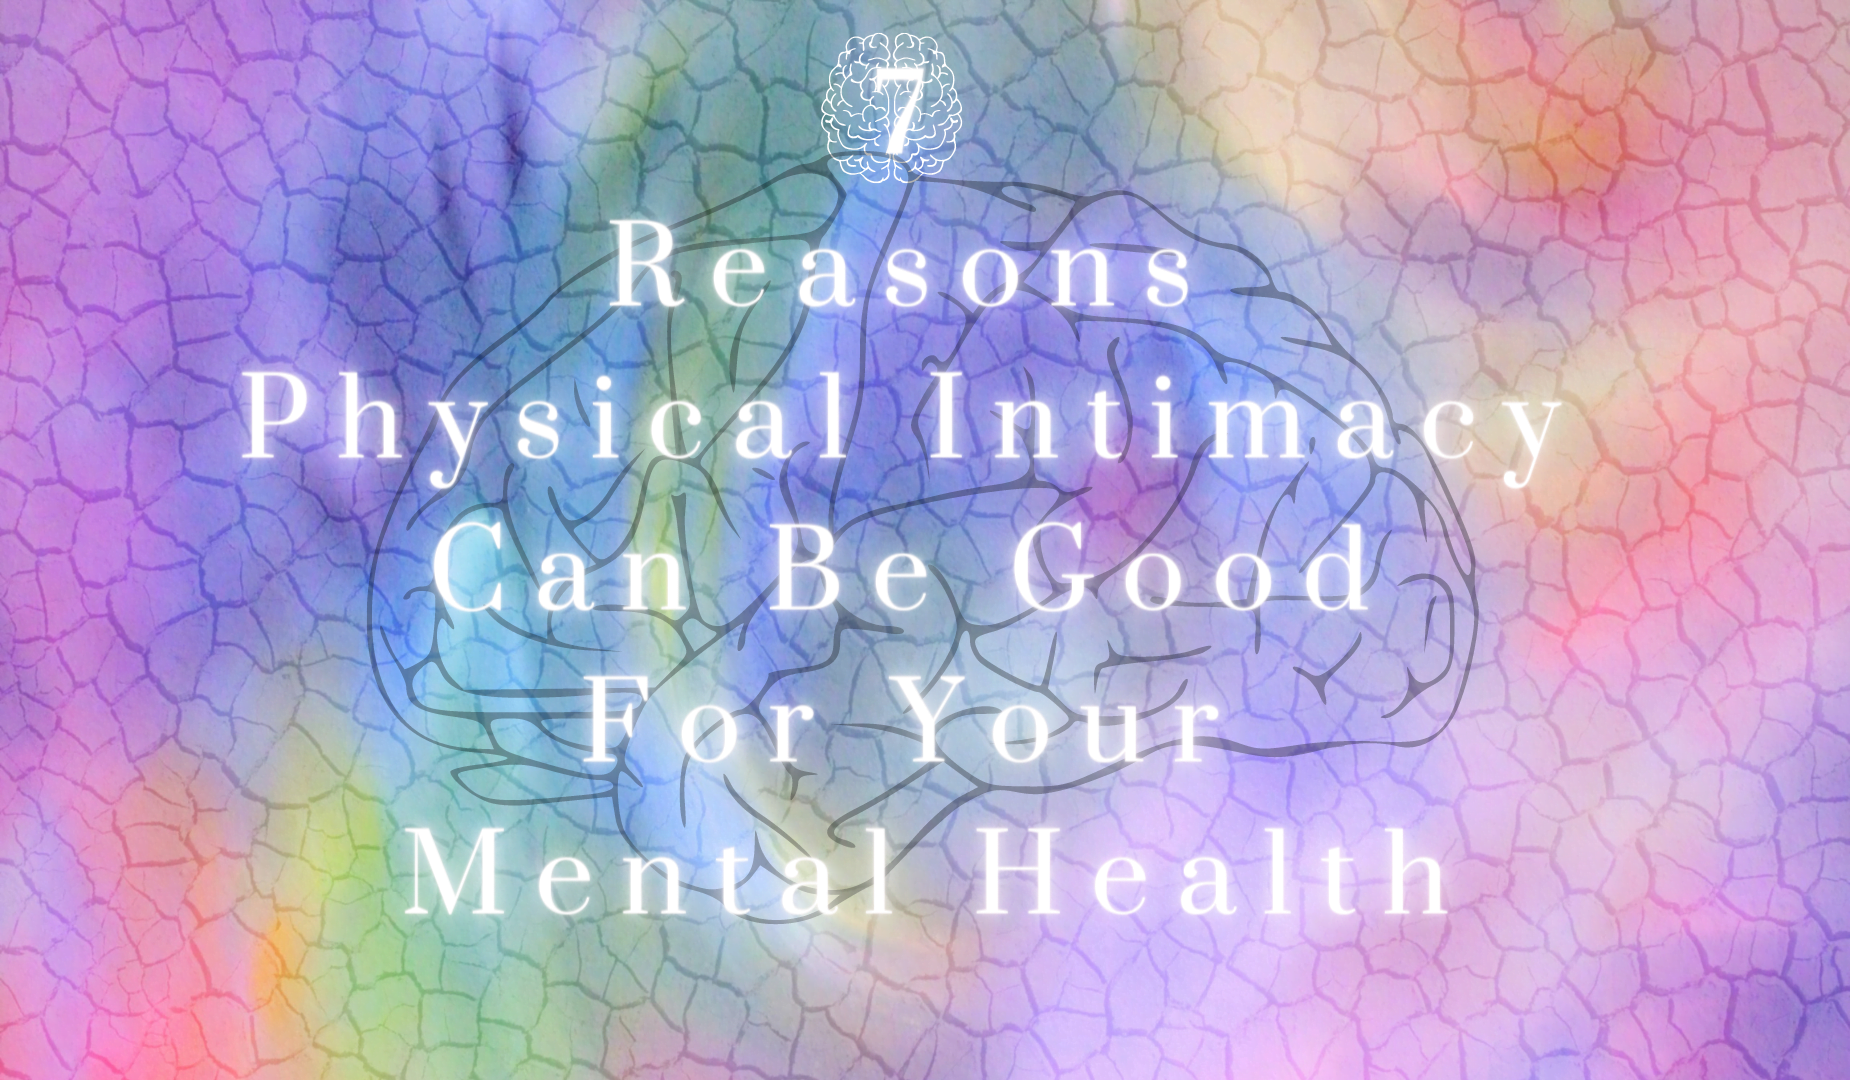 7 Reasons Physical Intimacy Can Be Good For Your Mental Health